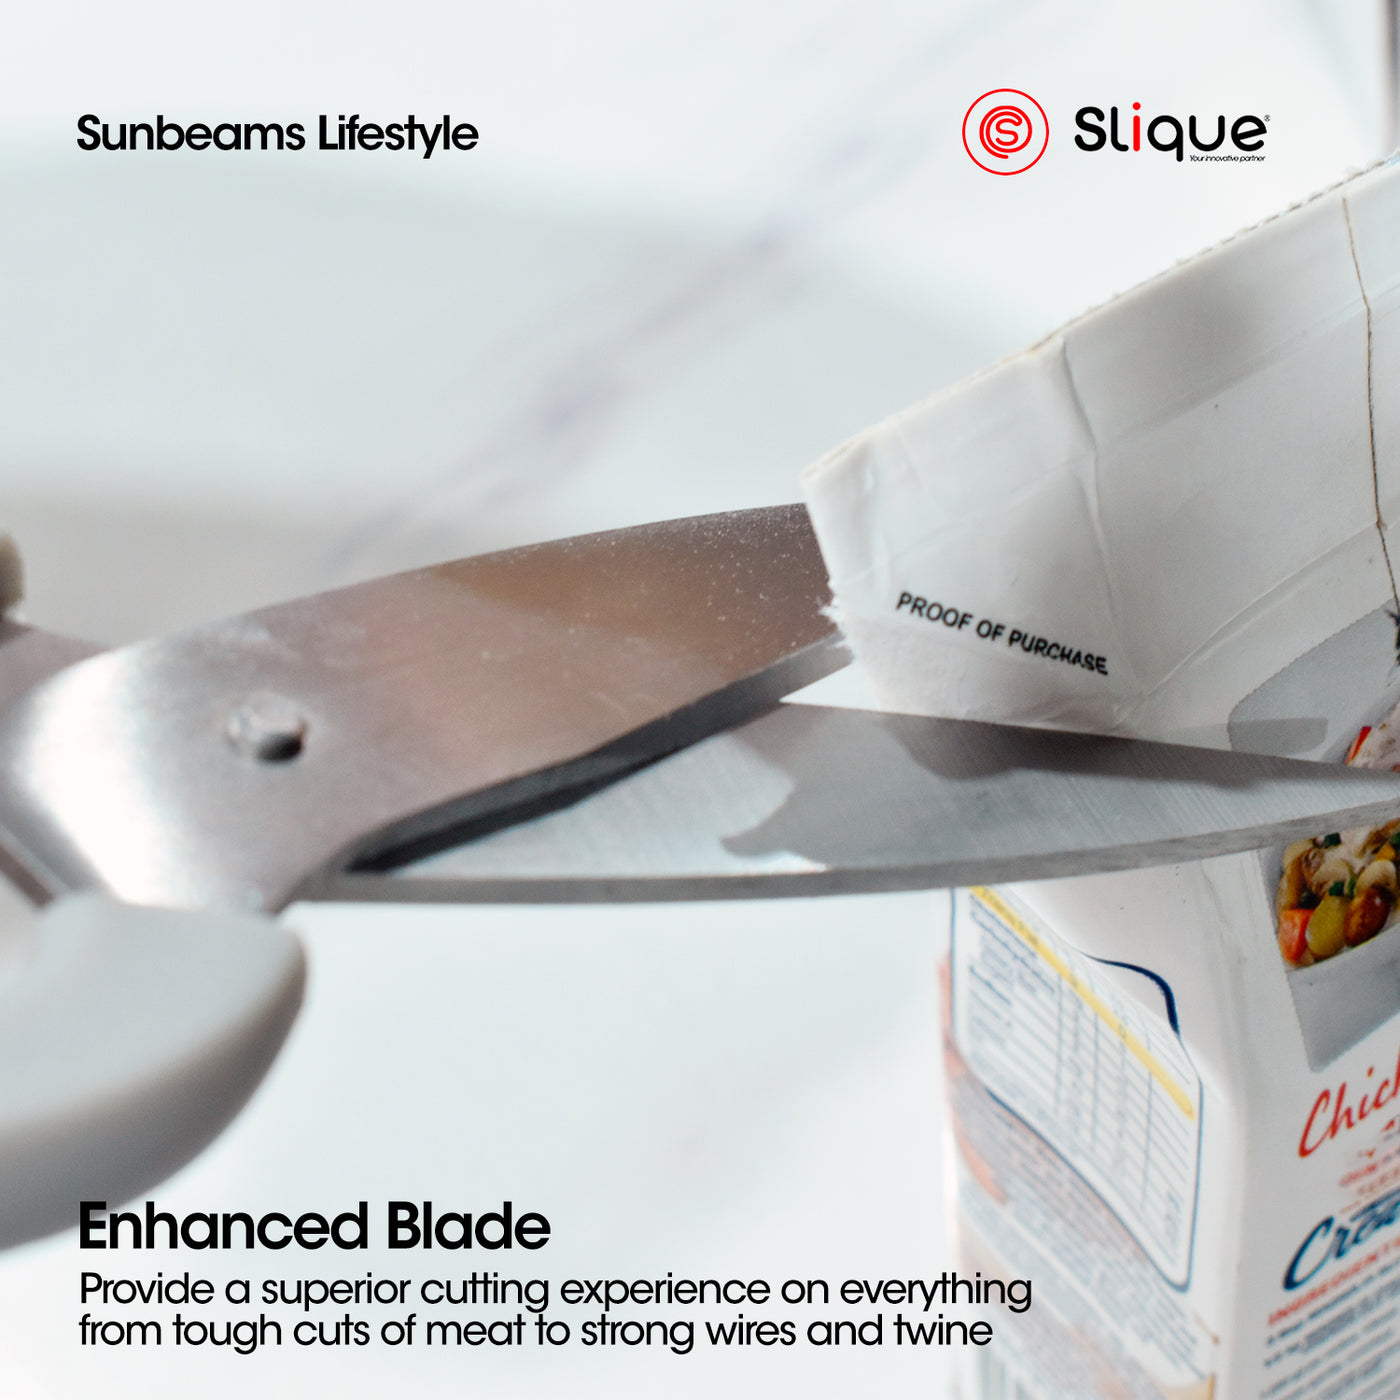 Slique Stainless Steel Kitchen Knives - Pairing | Utility | Bread | Slicer | Chef | Butcher | Santoku | Shear High Quality, Non-slip TPR handle, Kitchen Utensil Essential Amazing gift idea for any occasions!